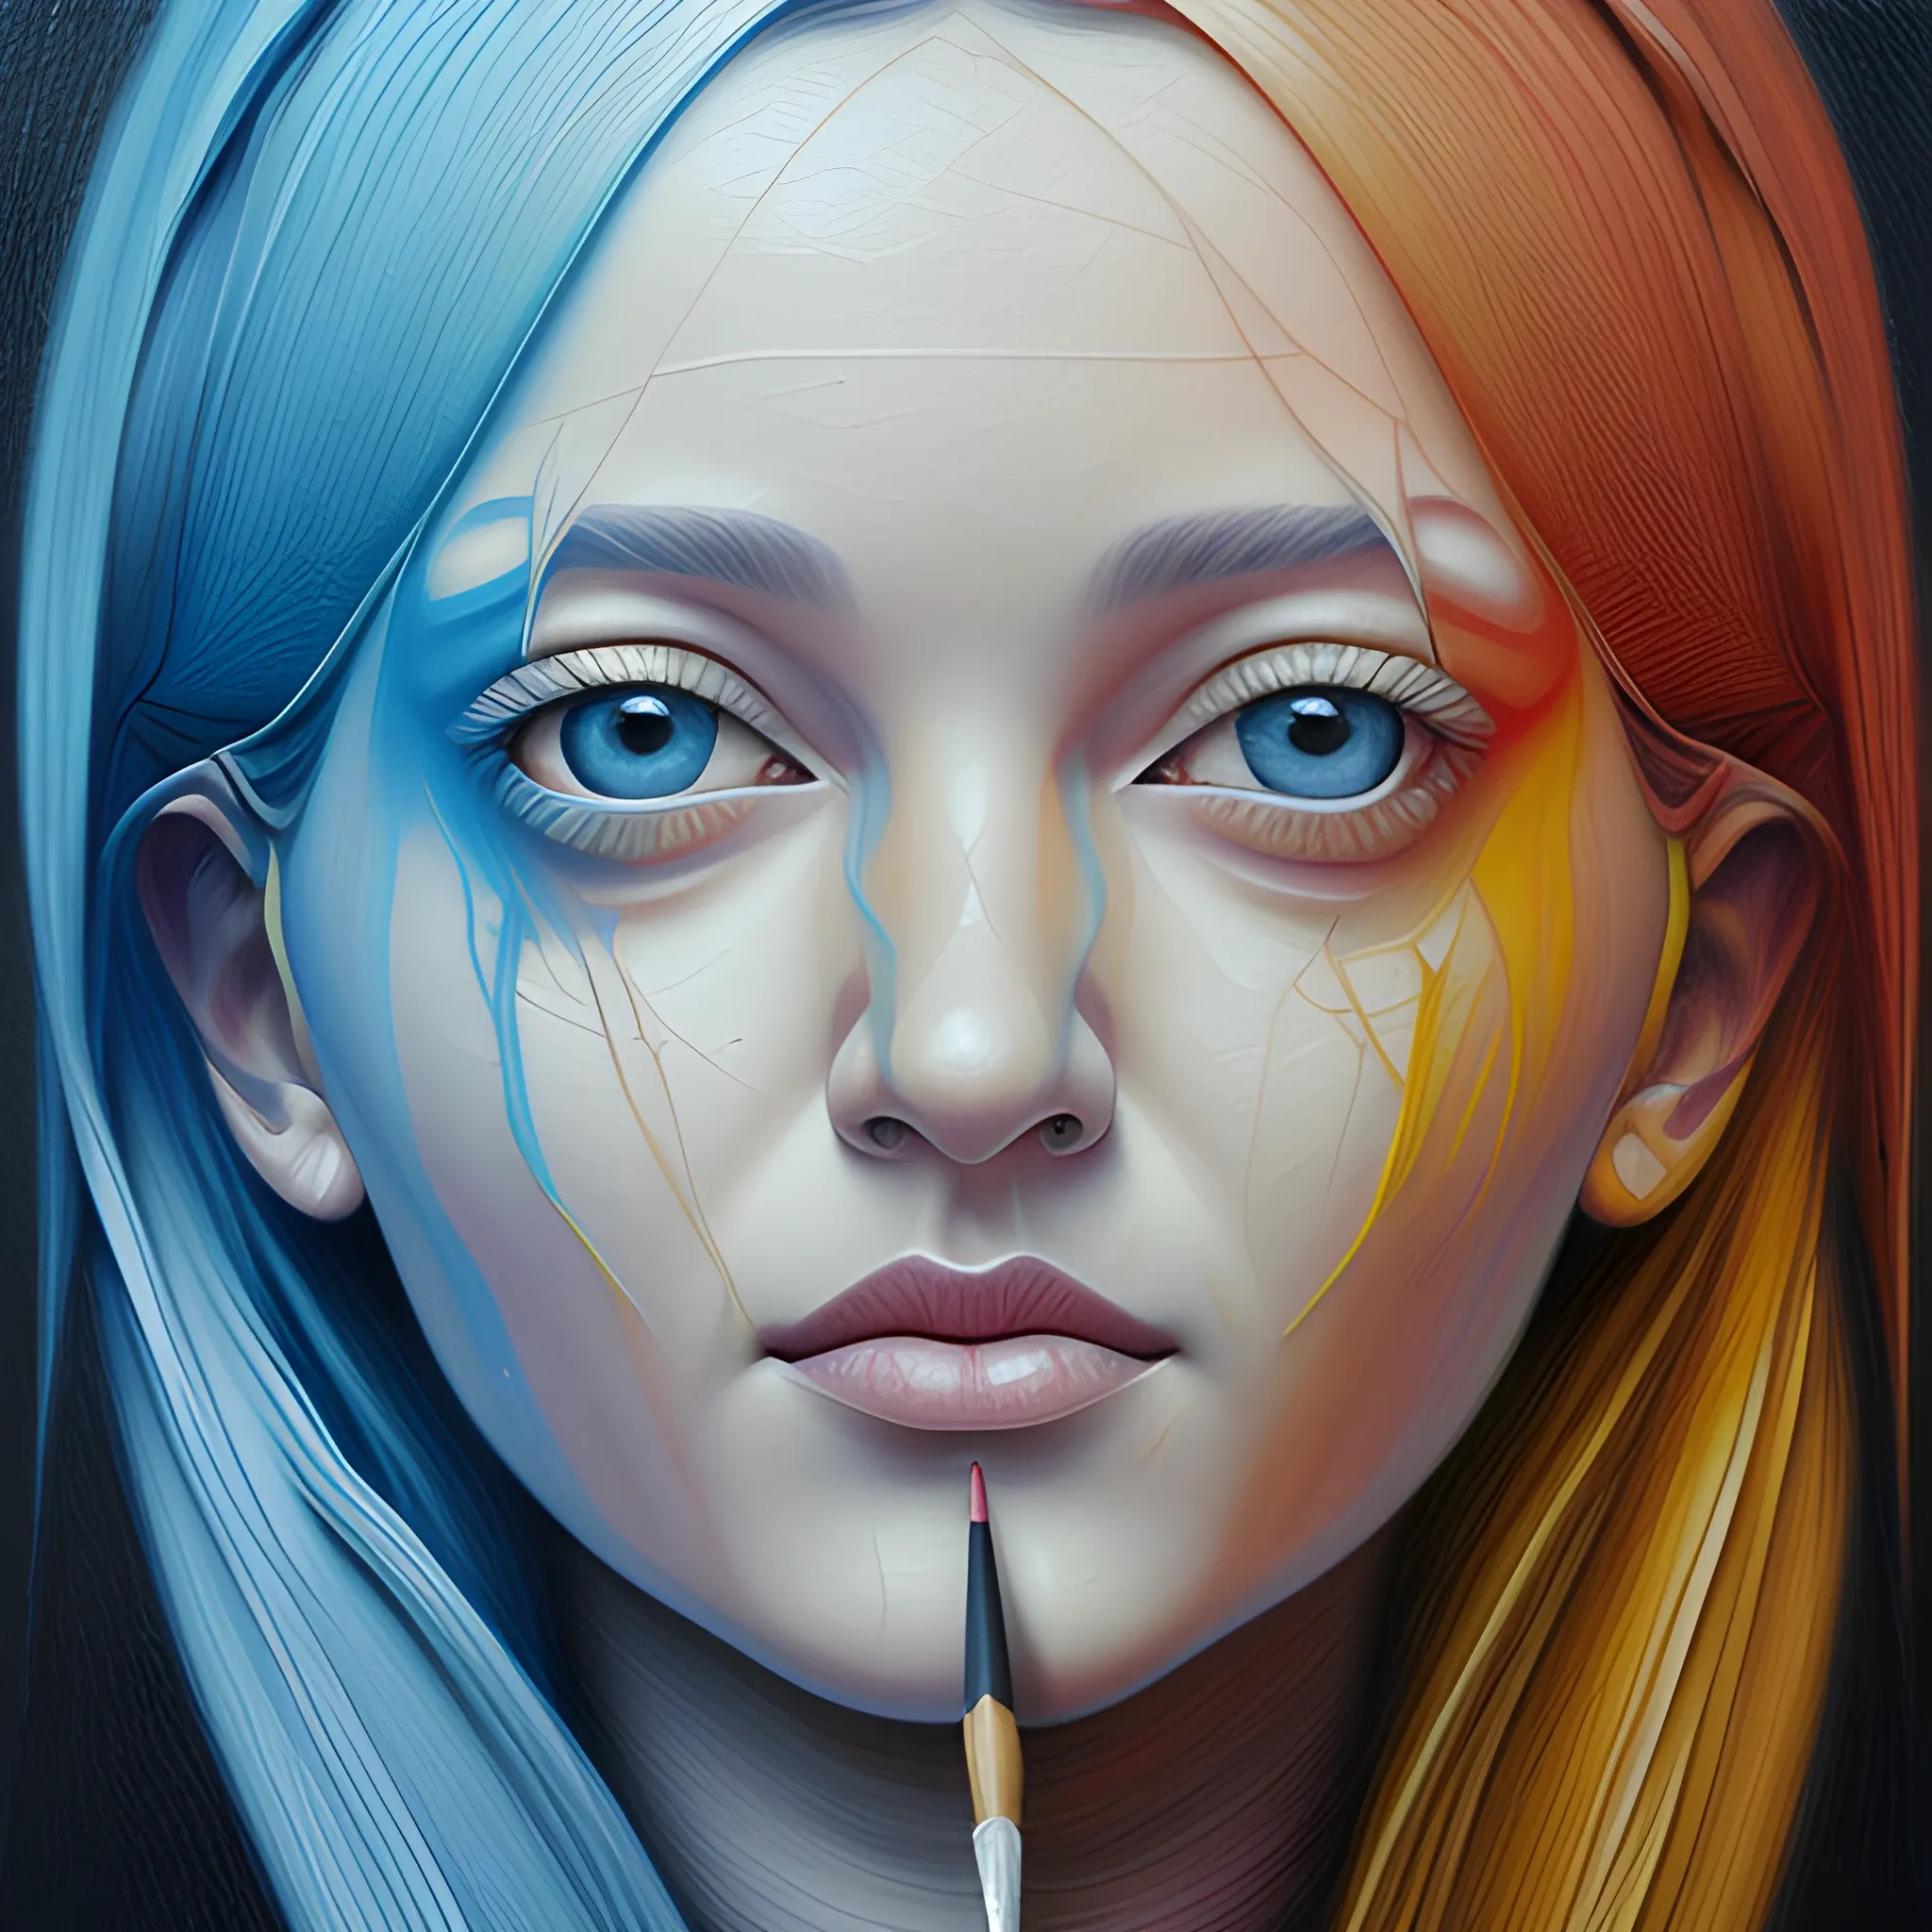 , Oil Painting, Oil Painting, Trippy, Pencil Sketch, 3D, HD Photo-realistic